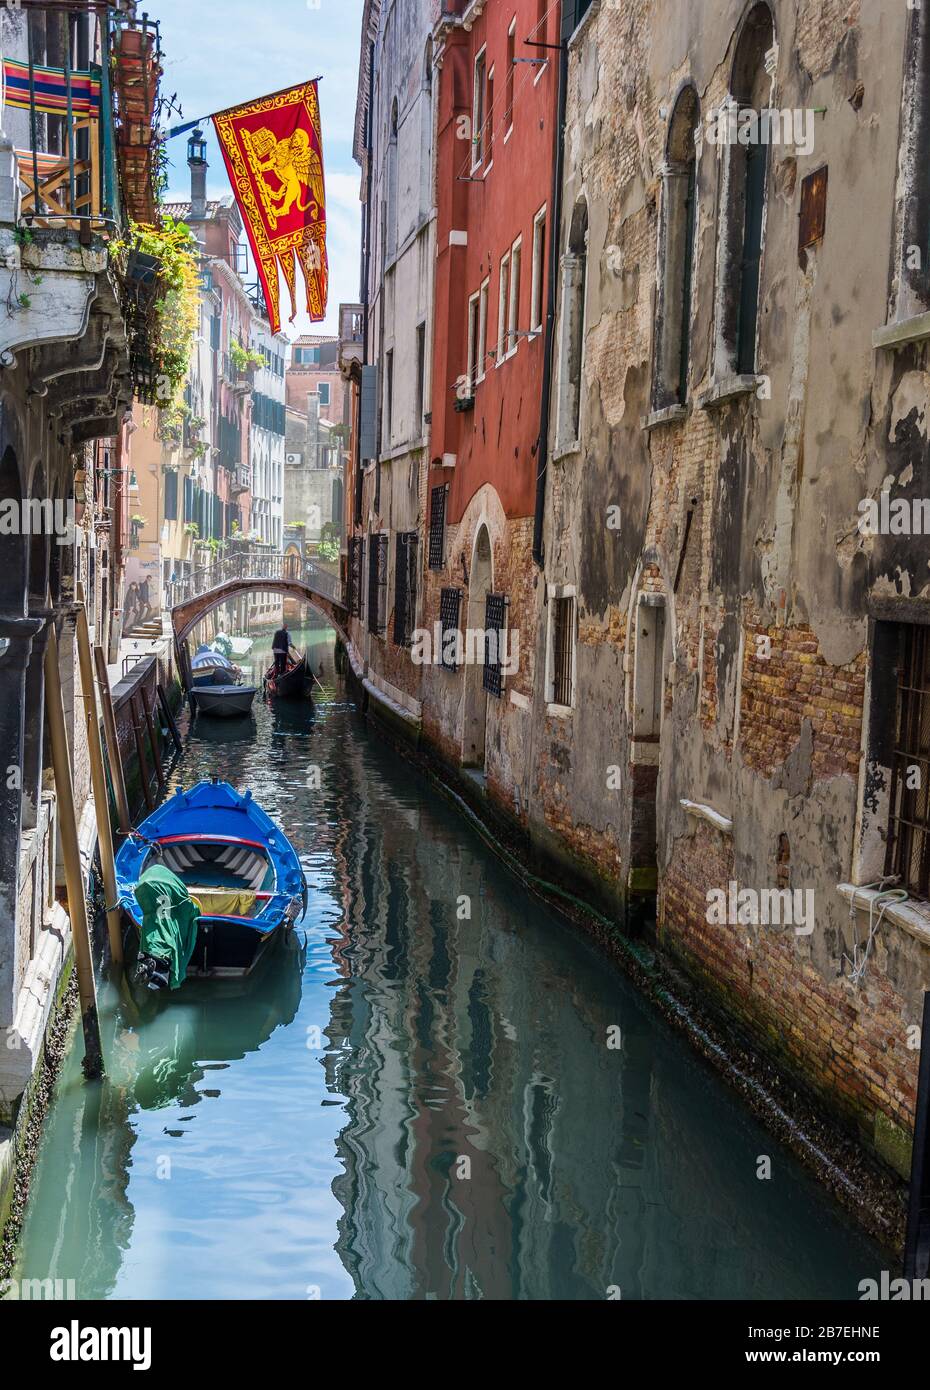 Venice, Italy - MAY 17, 2019: Venetian national flag flying in the center of Venice Stock Photo